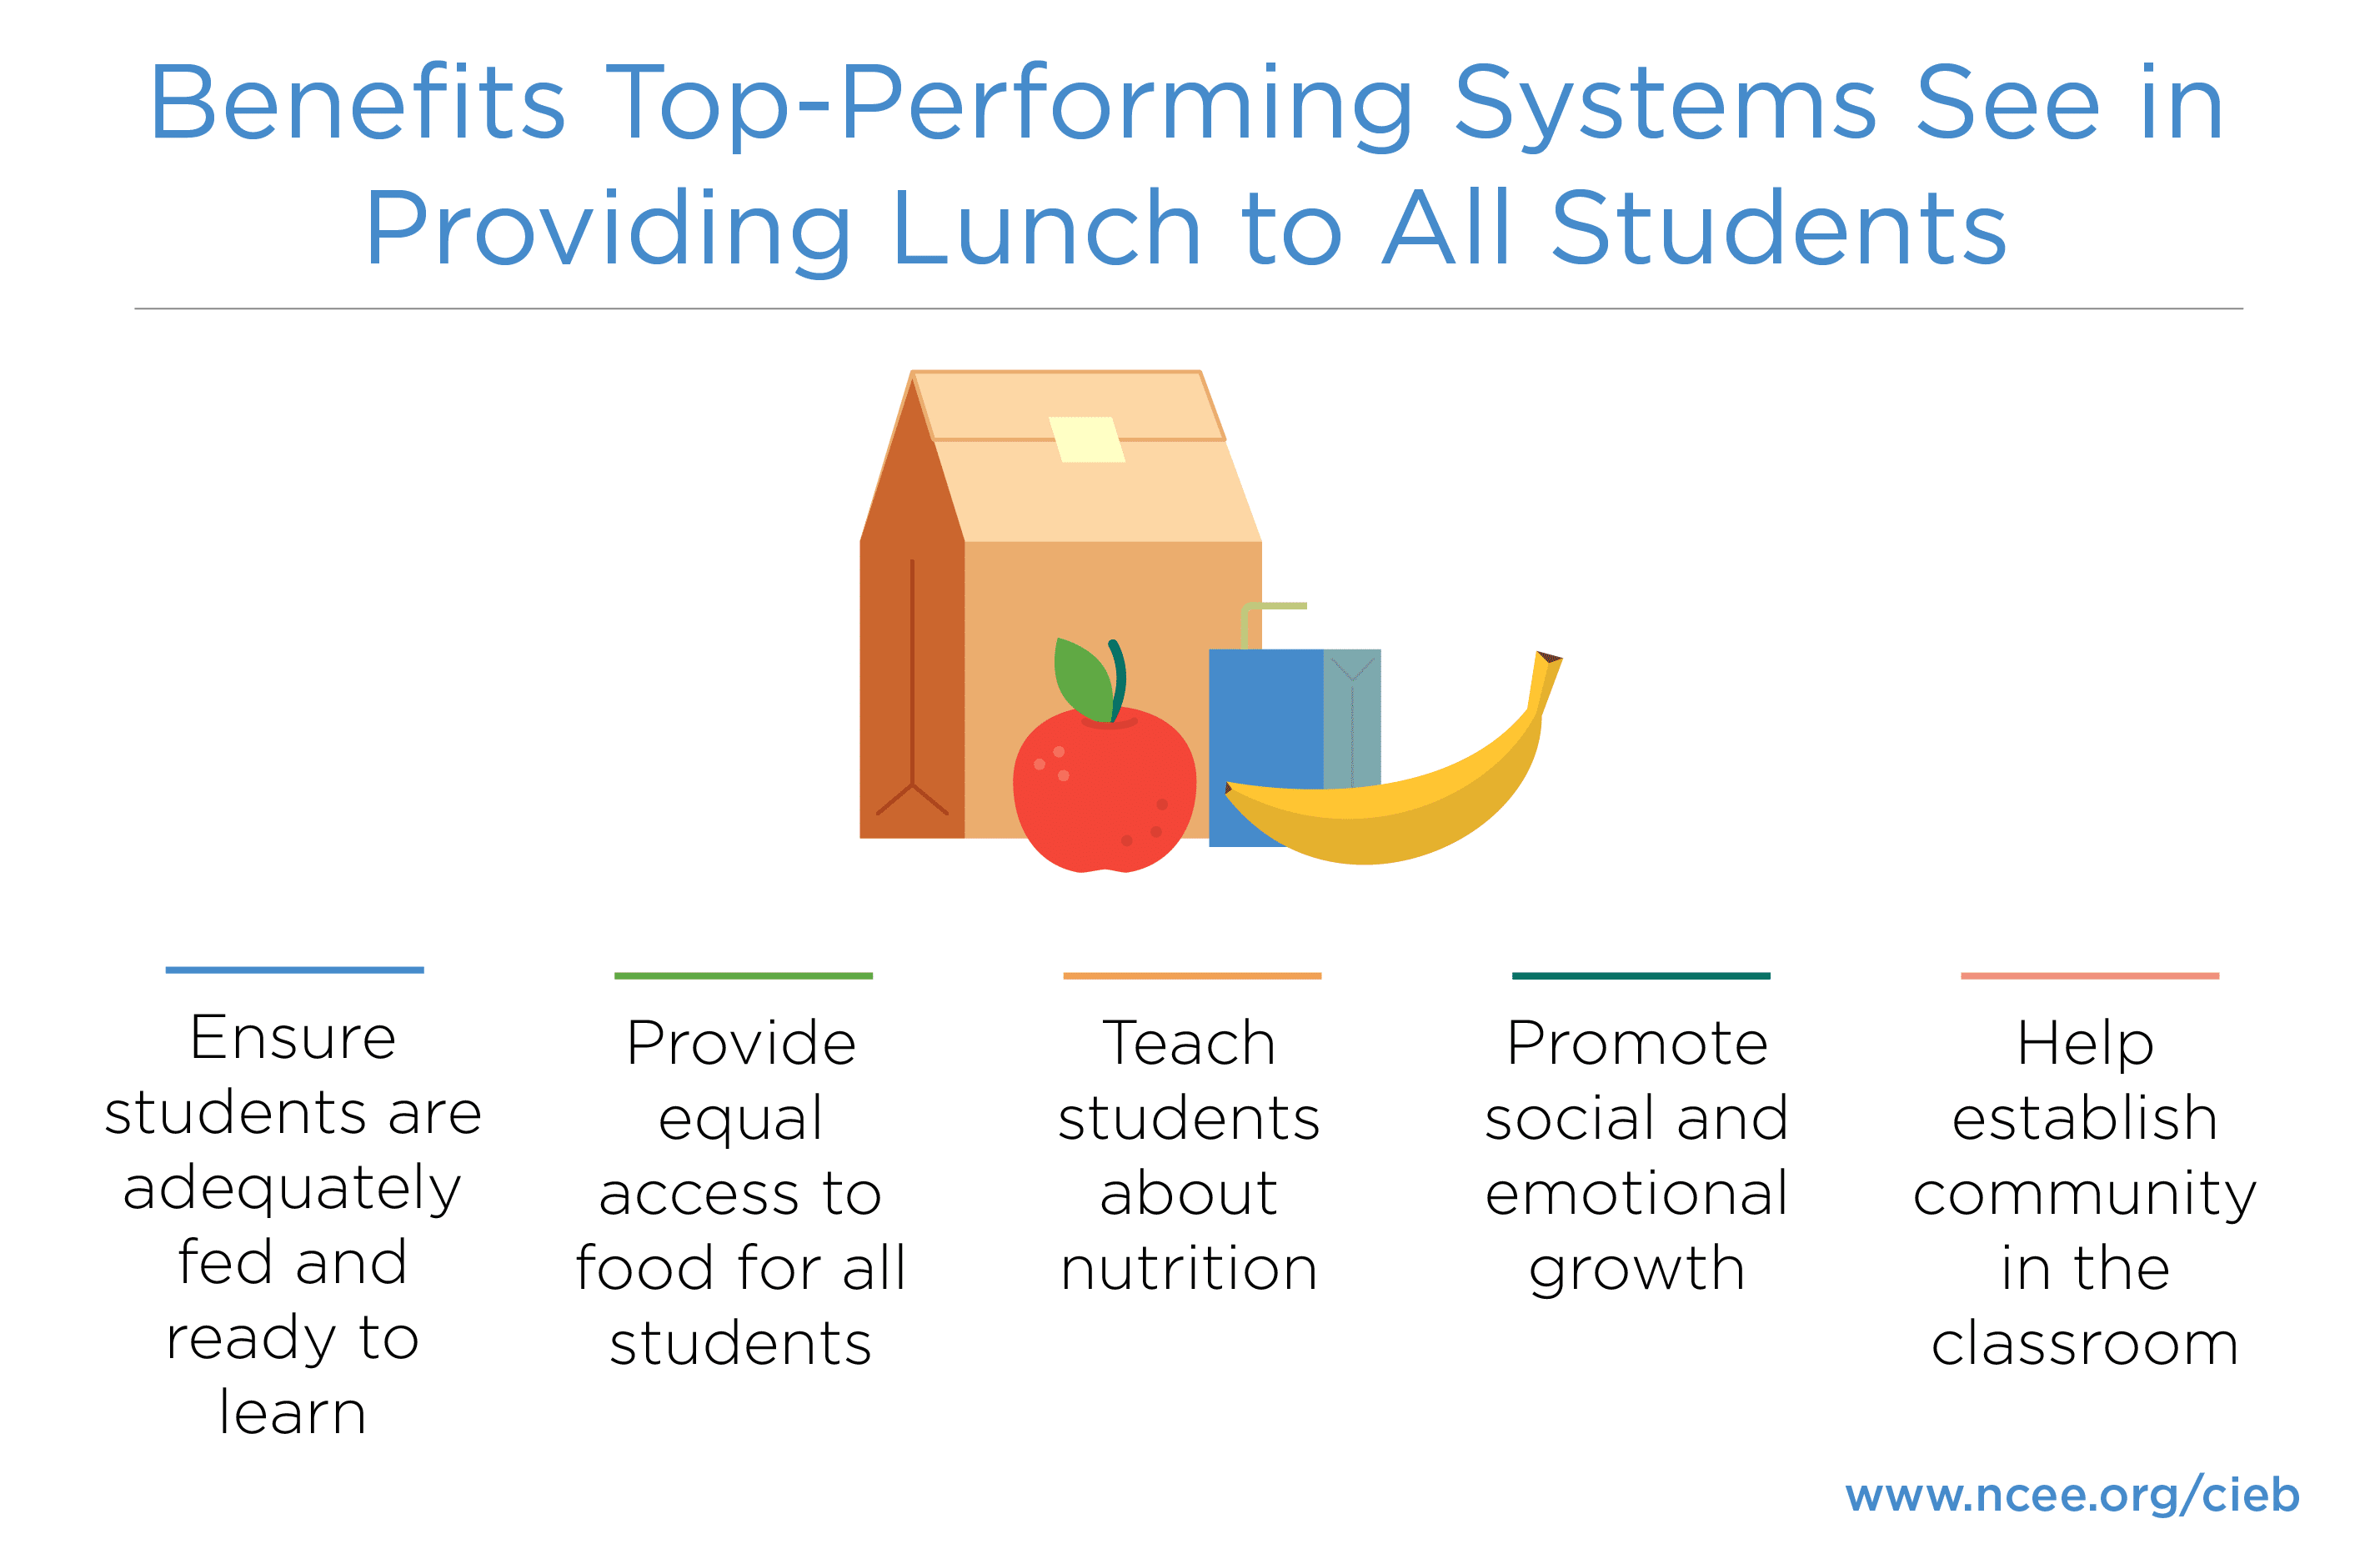 Top-performing systems see multiple benefits to providing lunch to all students.